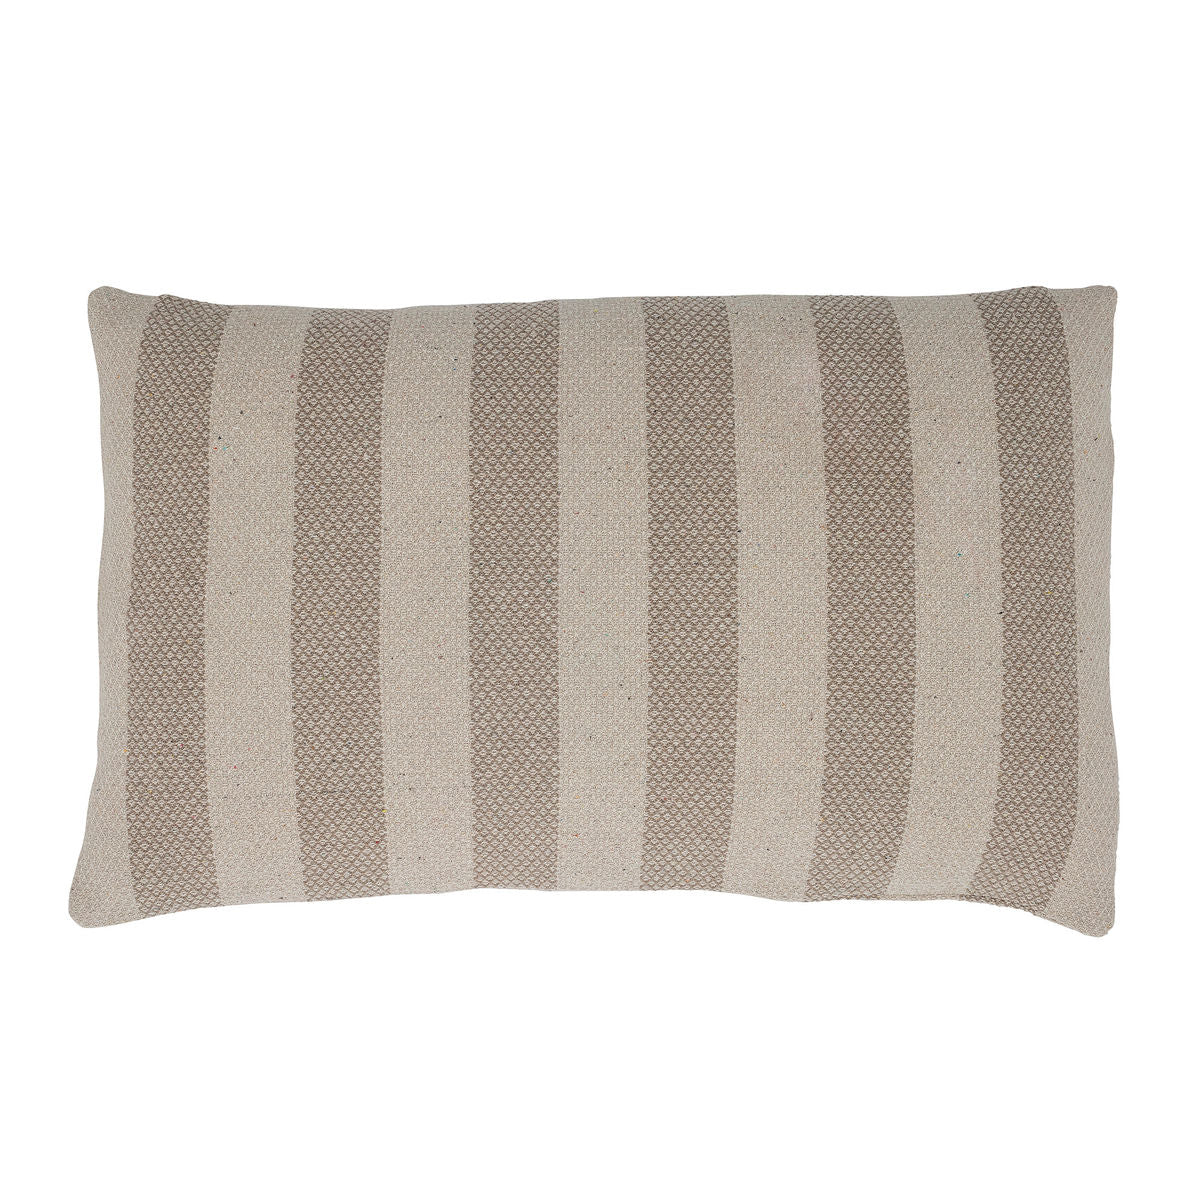 Bloomingville Eden Pillow, Brown, Recycled Cotton